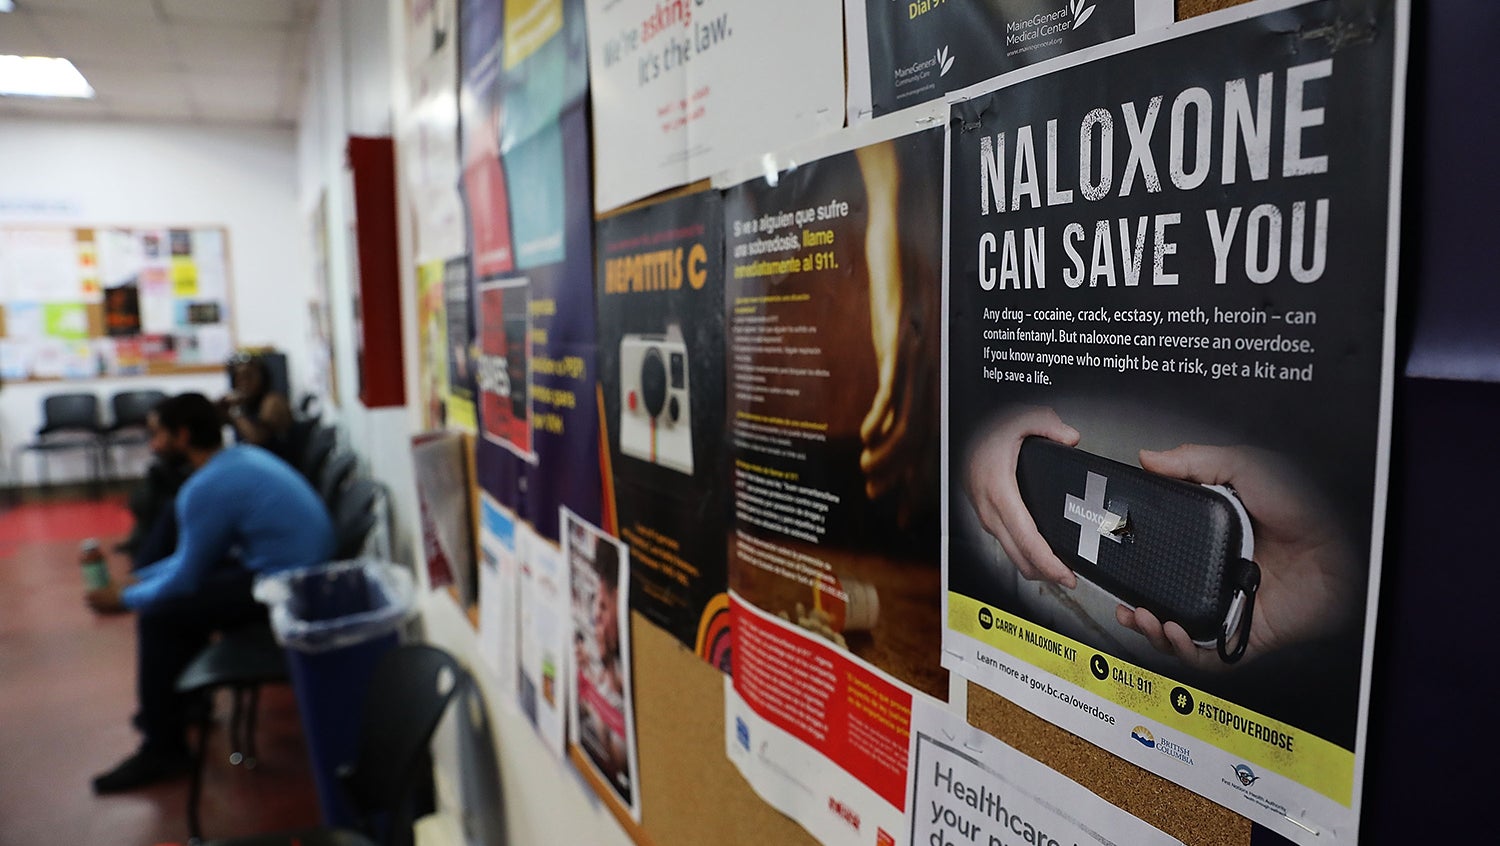 Posters about naloxone at addiction counseling meeting